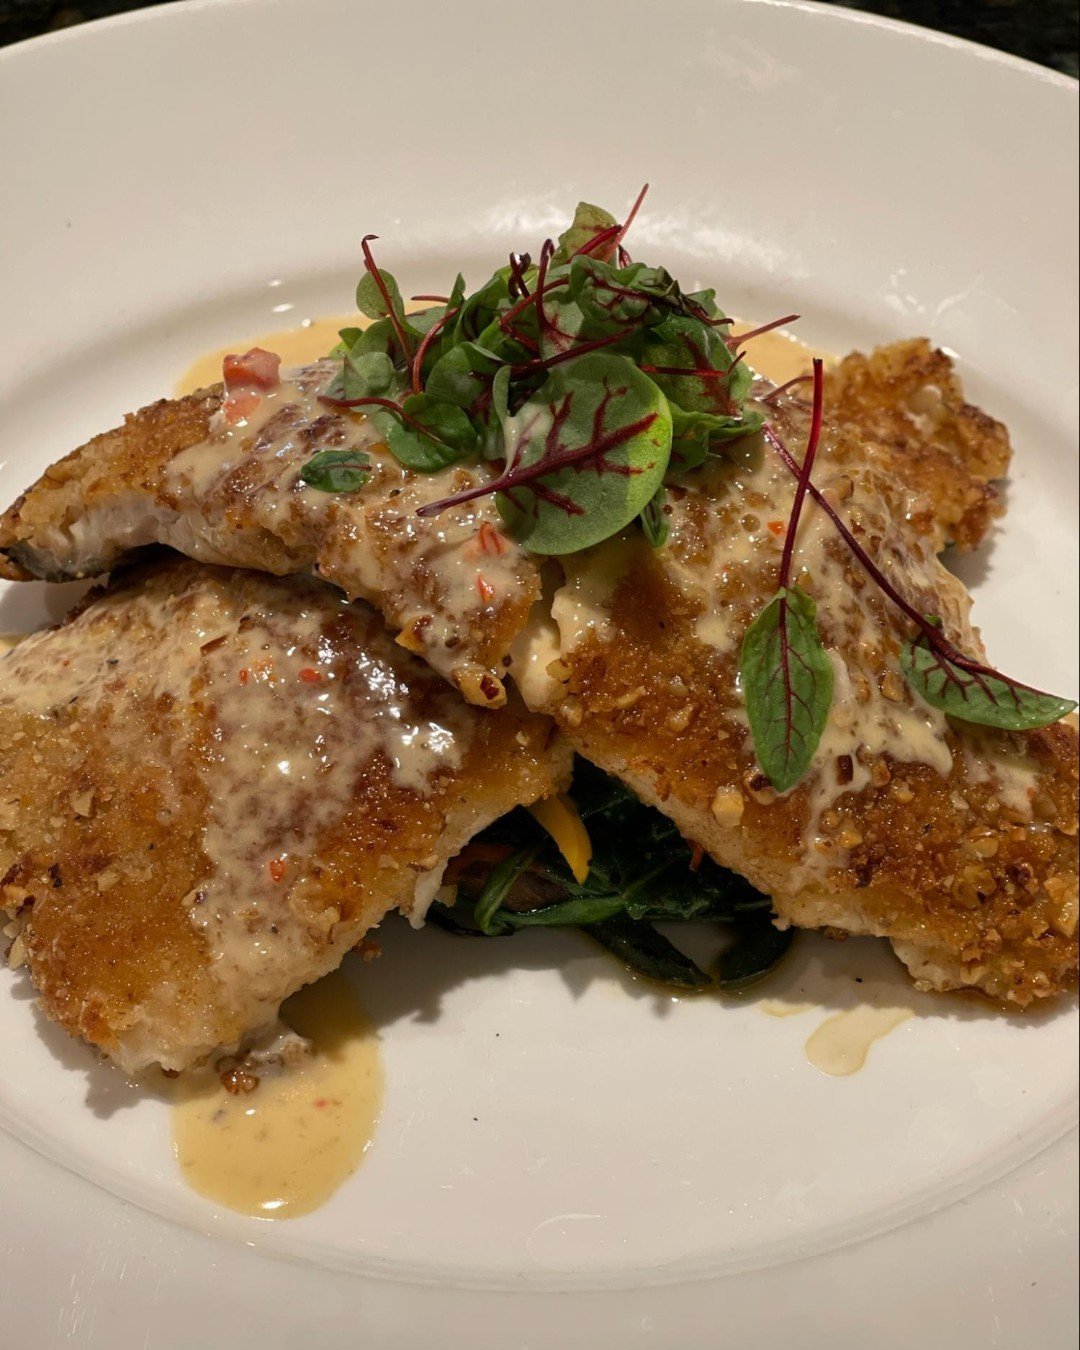 A little bit of Texas mixed with a lot of the coast. The Pecan Crusted Cast Iron Trout with baby spinach, bell peppers and a beurre blanc is a menu item that if you have not tried, you MUST add to your next venture to Jasper&rsquo;s.